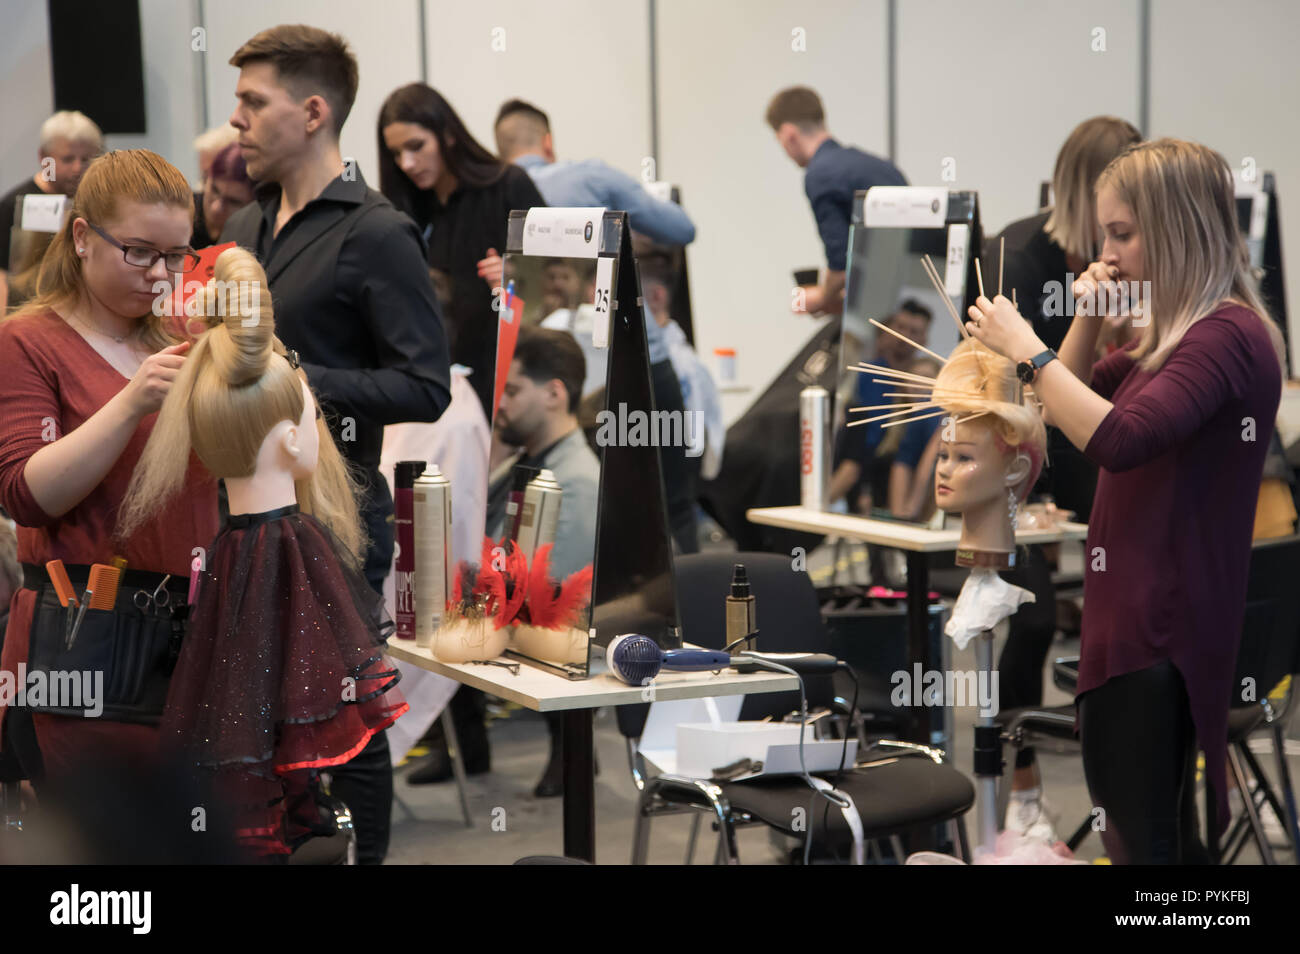 Budapest. 28th Oct, 2018. Participants compete during the 60th Hair Styling National Championship held in Budapest, Hungary on Oct. 28, 2018. Credit: Attila Volgyi/Xinhua/Alamy Live News Stock Photo